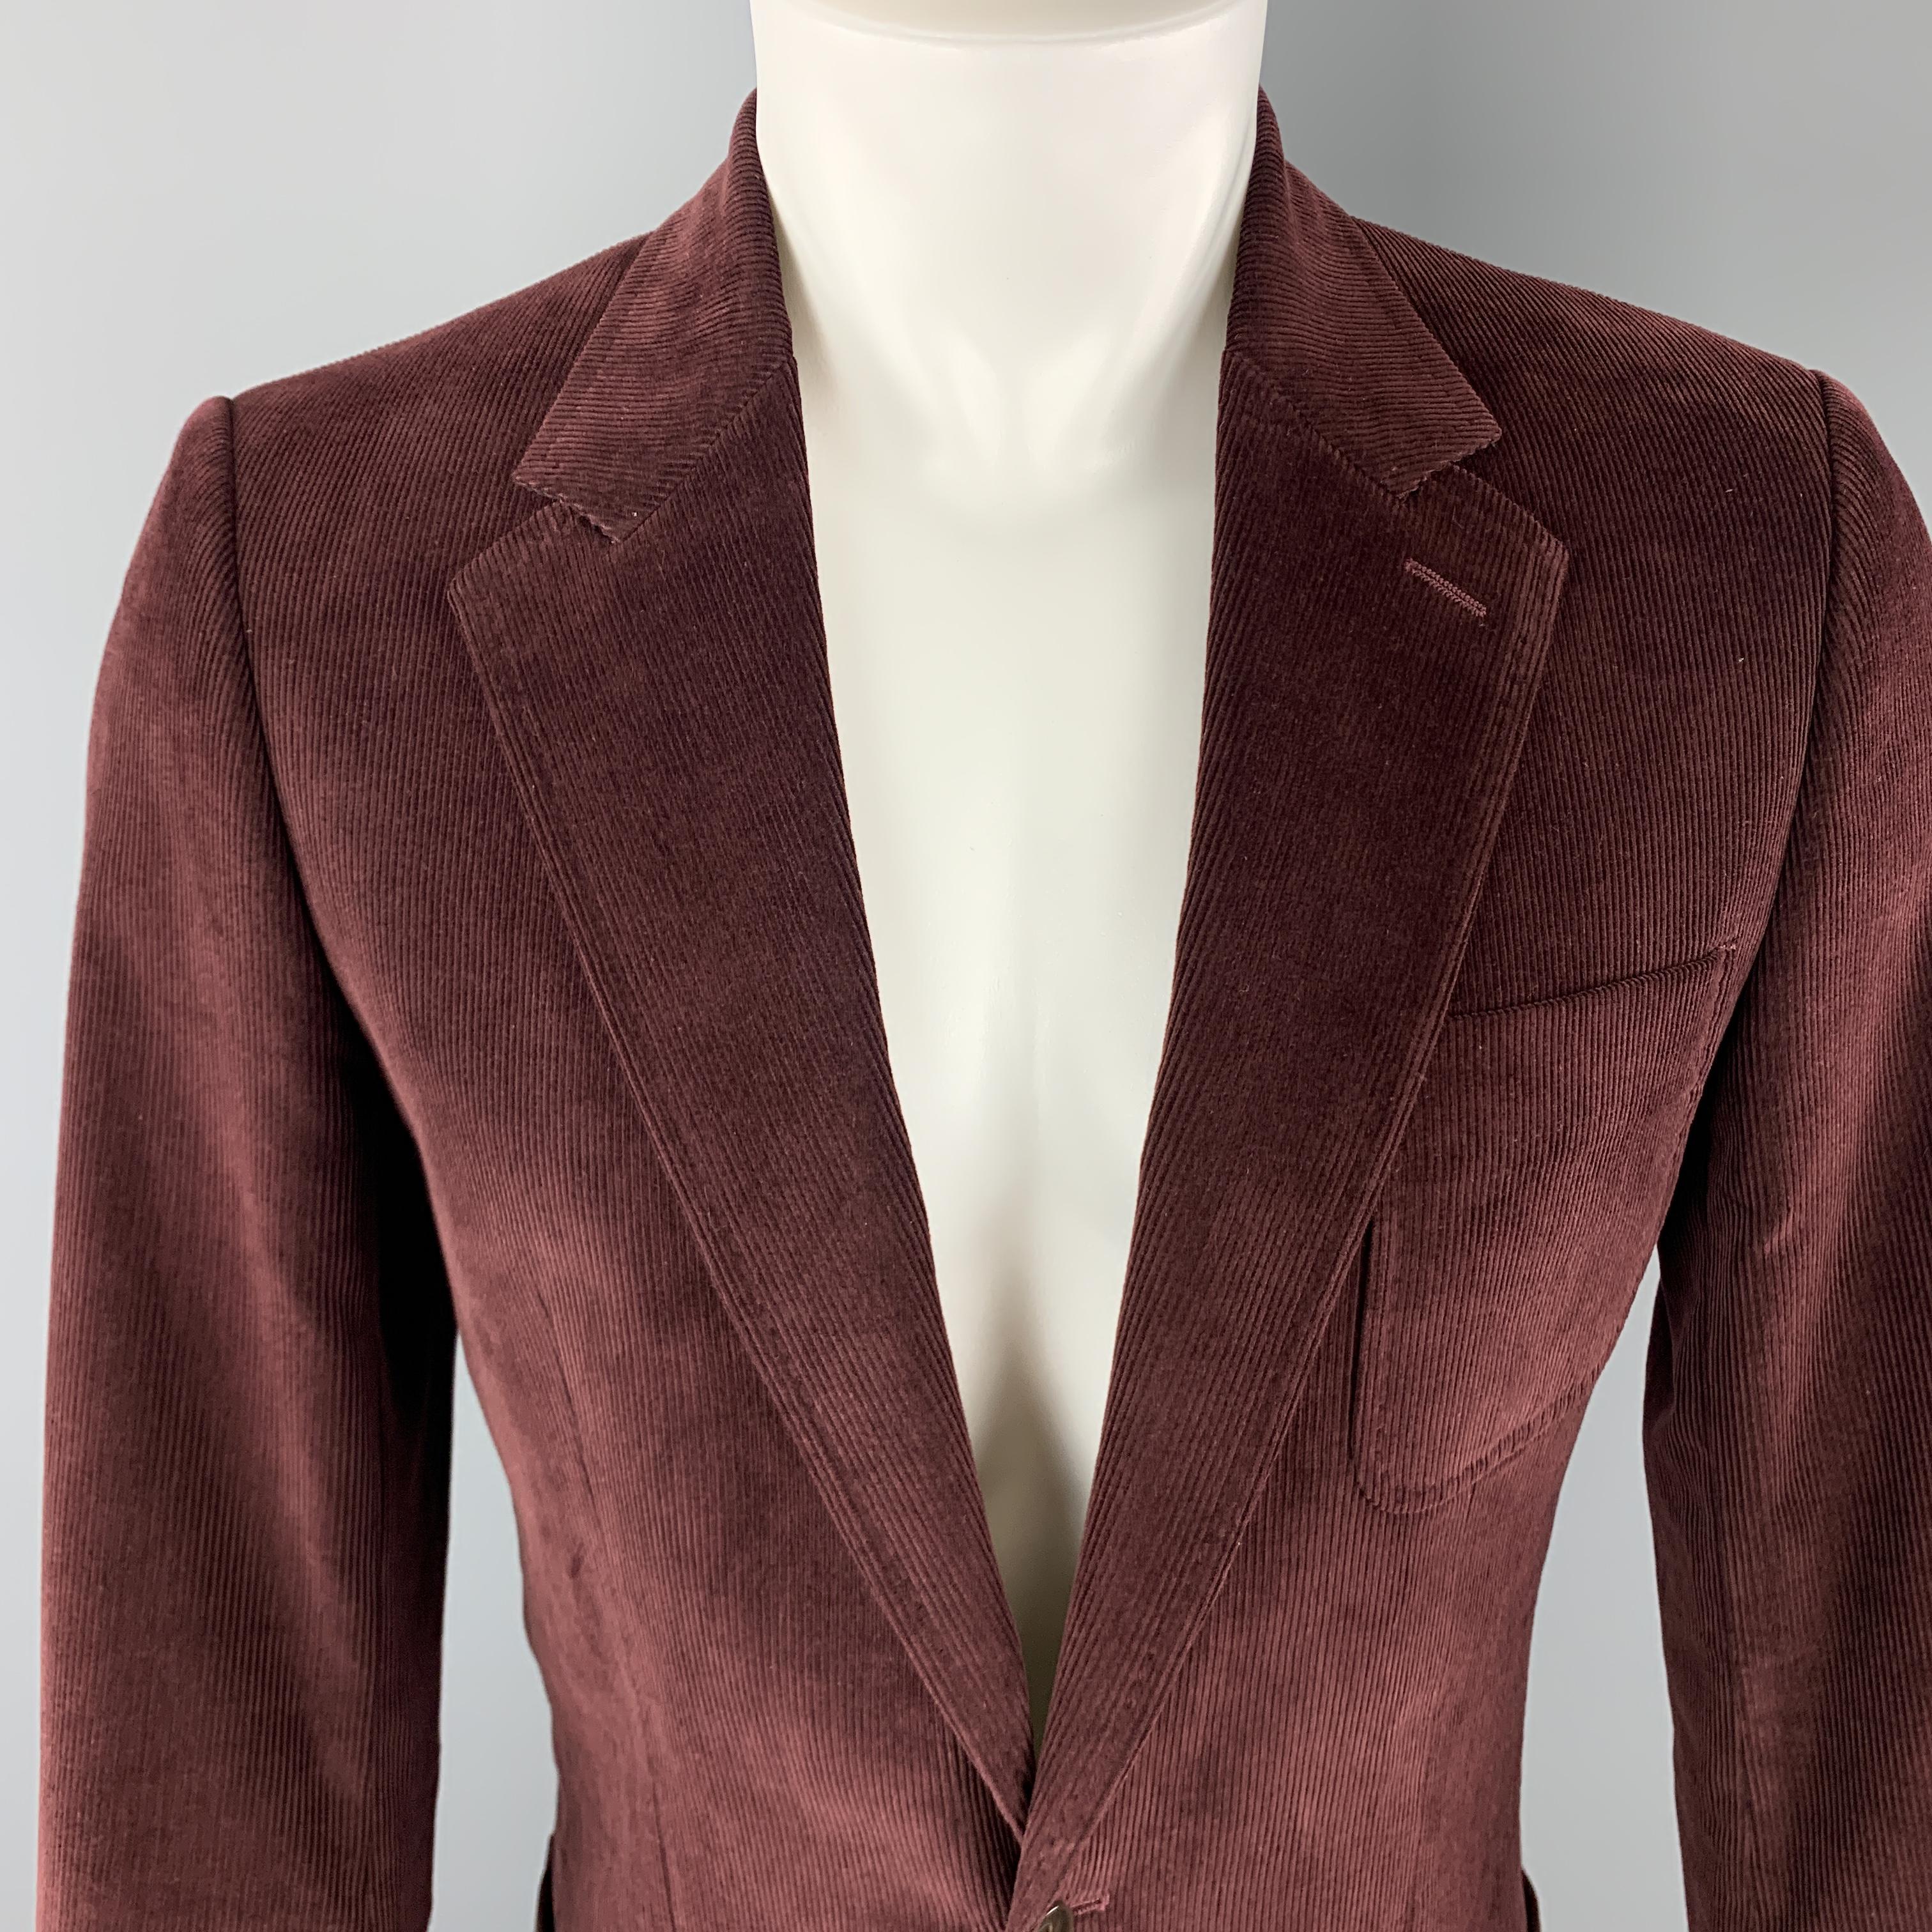 DOLCE & GABBANA sport coat comes in burgundy corduroy with a notch lapel, single breasted, two button front, and patch pockets. Made in Italy.

Excellent Pre-Owned Condition.
Marked: IT 46

Measurements:

Shoulder: 17 in.
Chest: 38 in.
Sleeve: 26